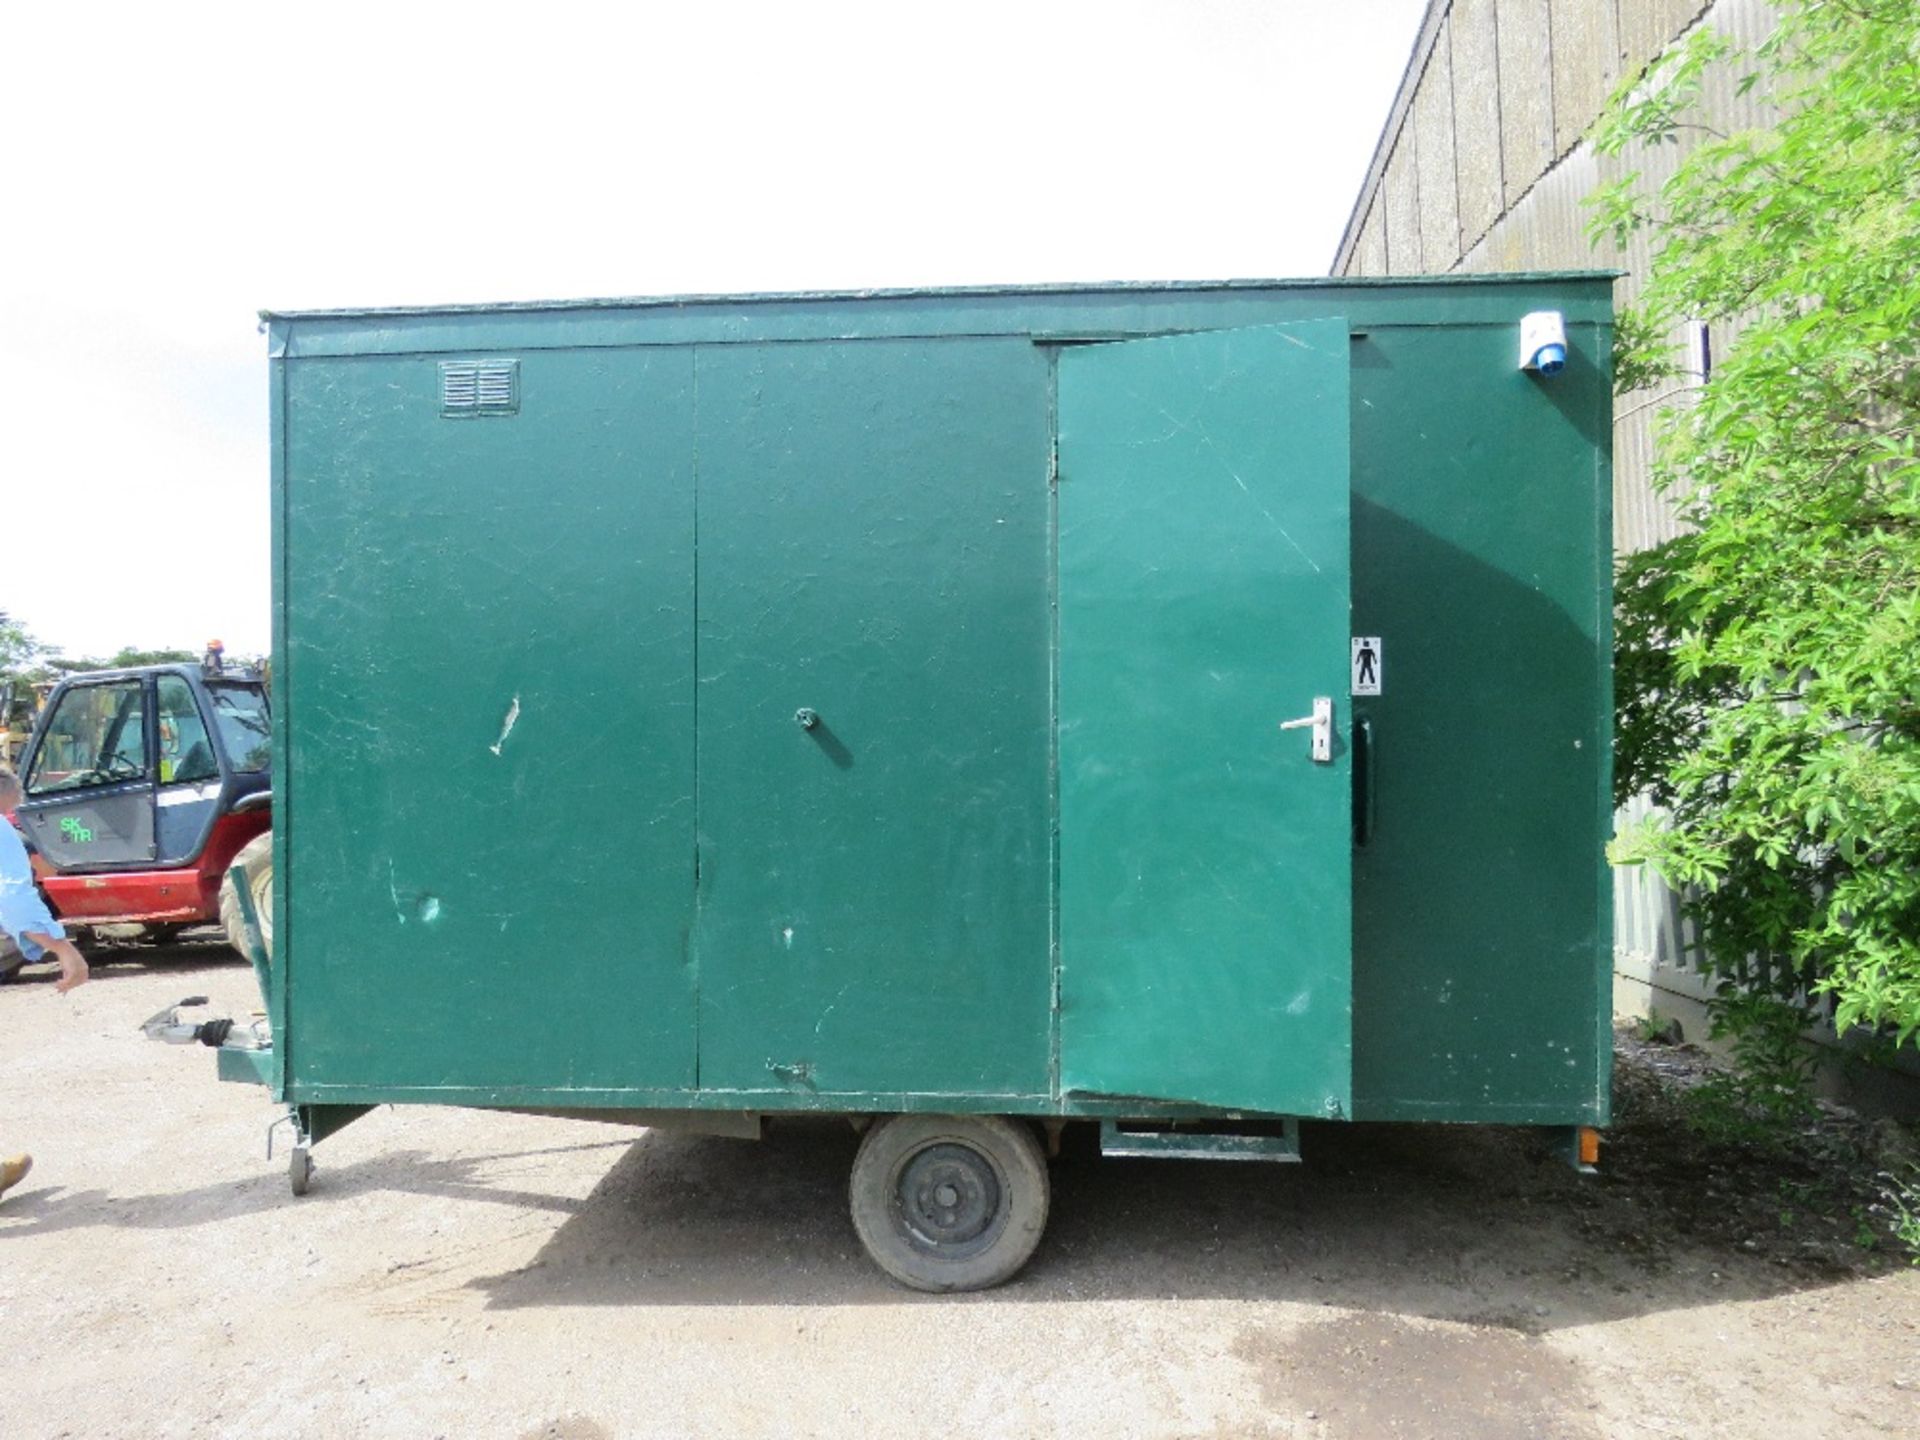 SINGLE AXLED TOWED TOILET BLOCK 12FT X 7FT APPROX. COMPRISES SINGLE WC WITH SINK FOR LADIES, GENTS H - Image 11 of 13